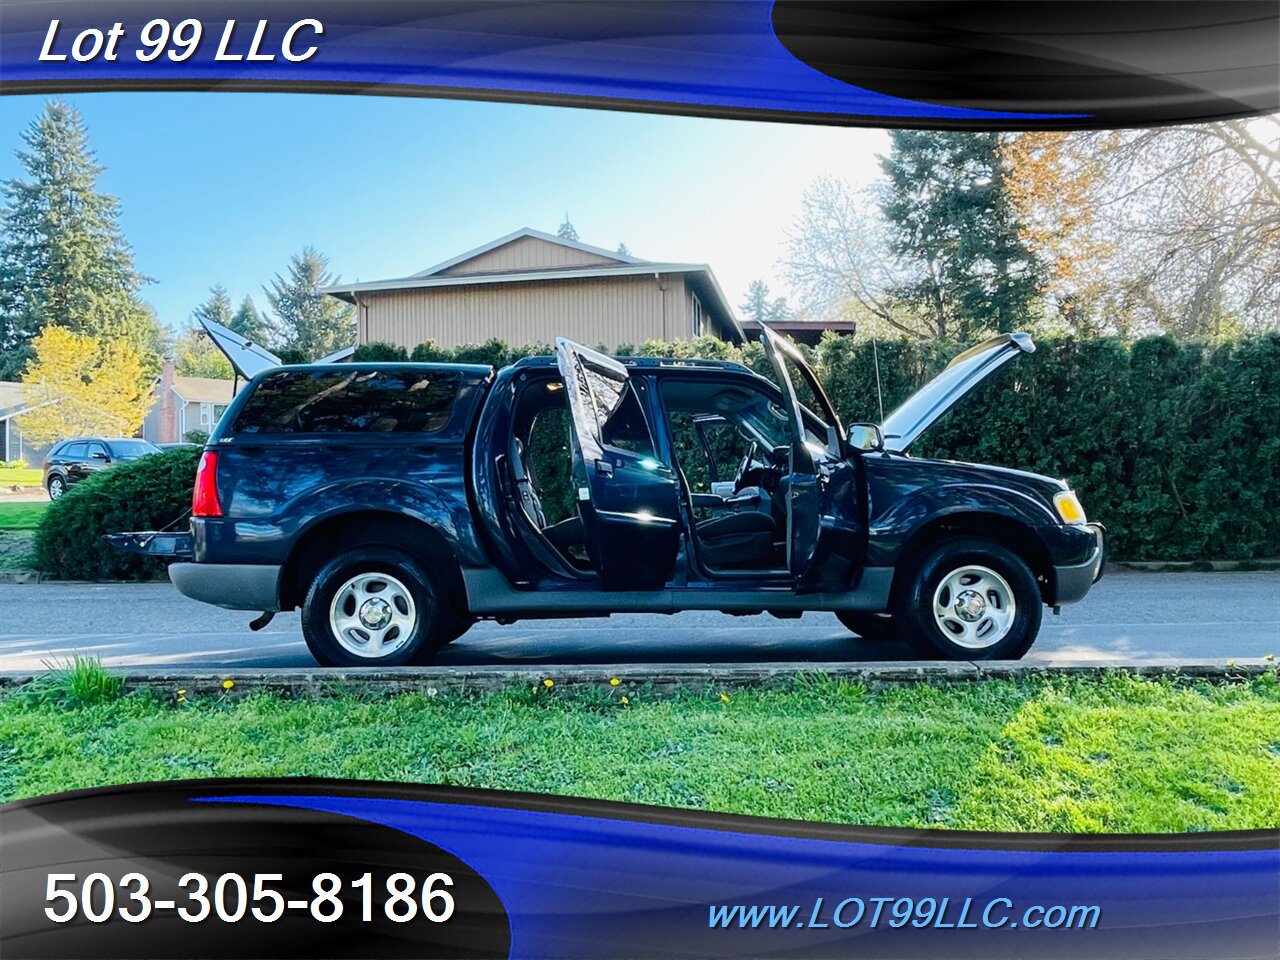 2003 Ford Explorer Sport Trac XLS 4x4  1-OWNER 117k  NEW TIRES  Canopy   - Photo 46 - Milwaukie, OR 97267